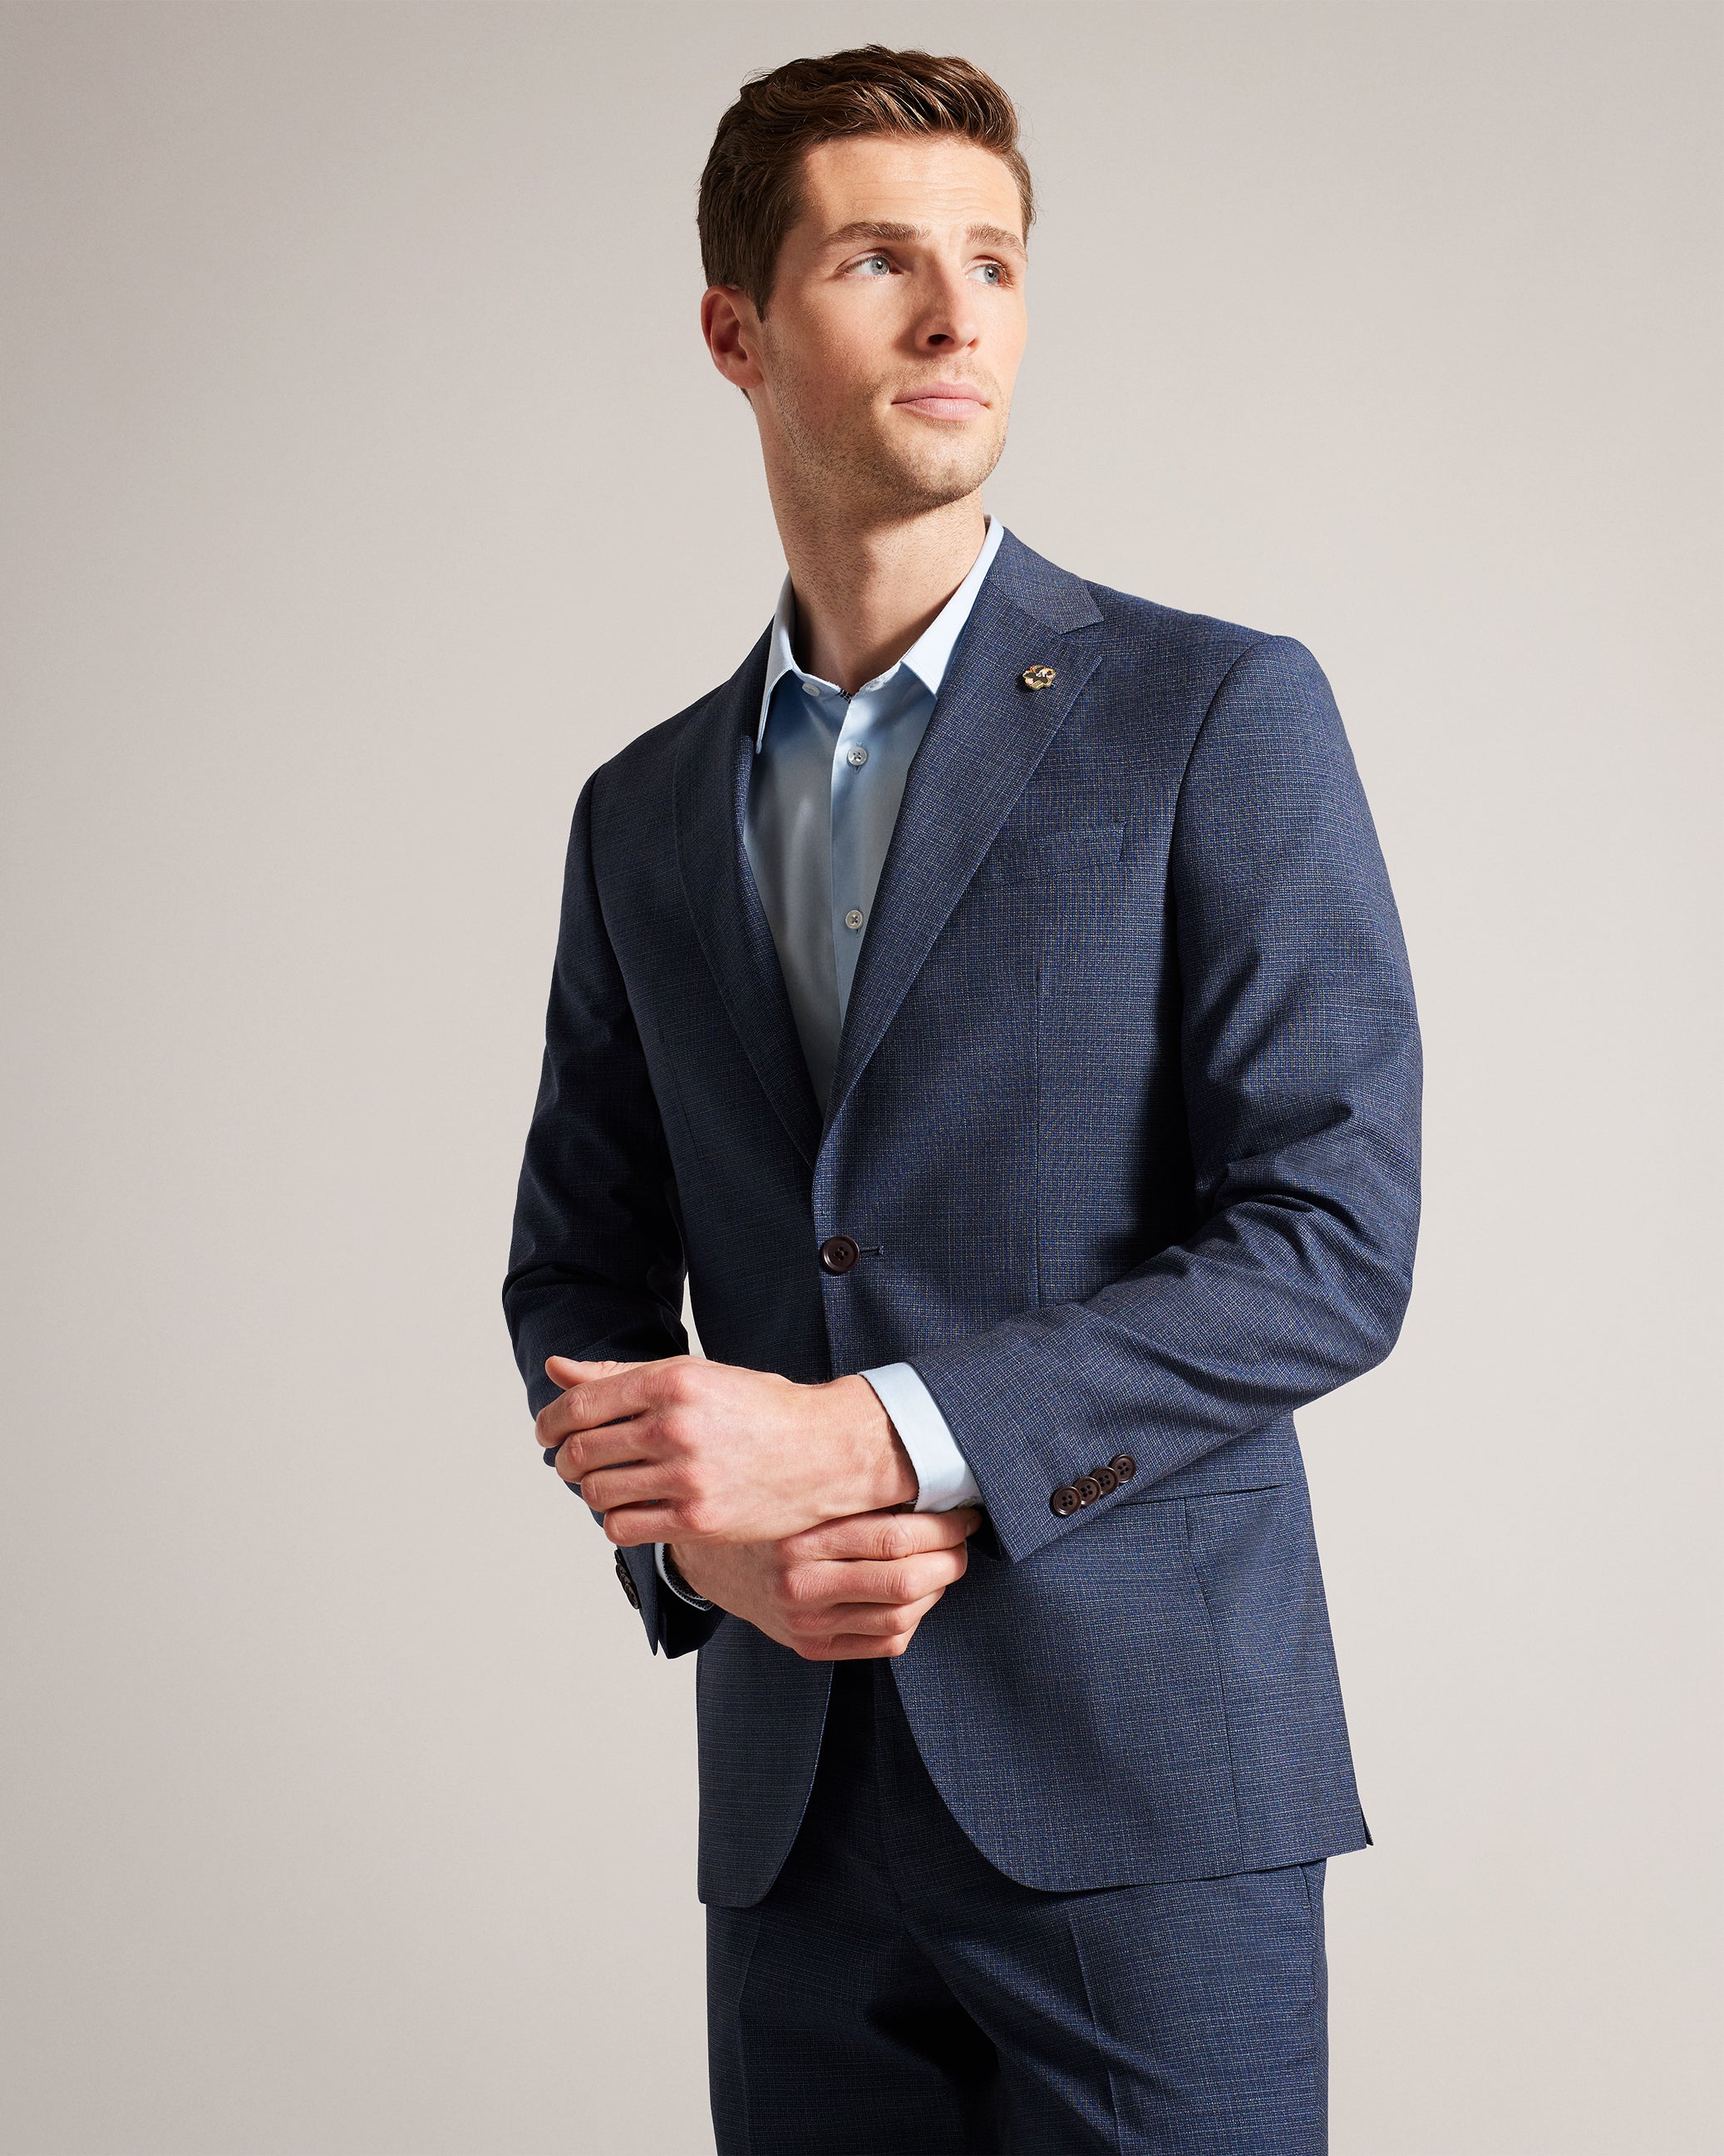 Men's Suits – Ted Baker, Canada